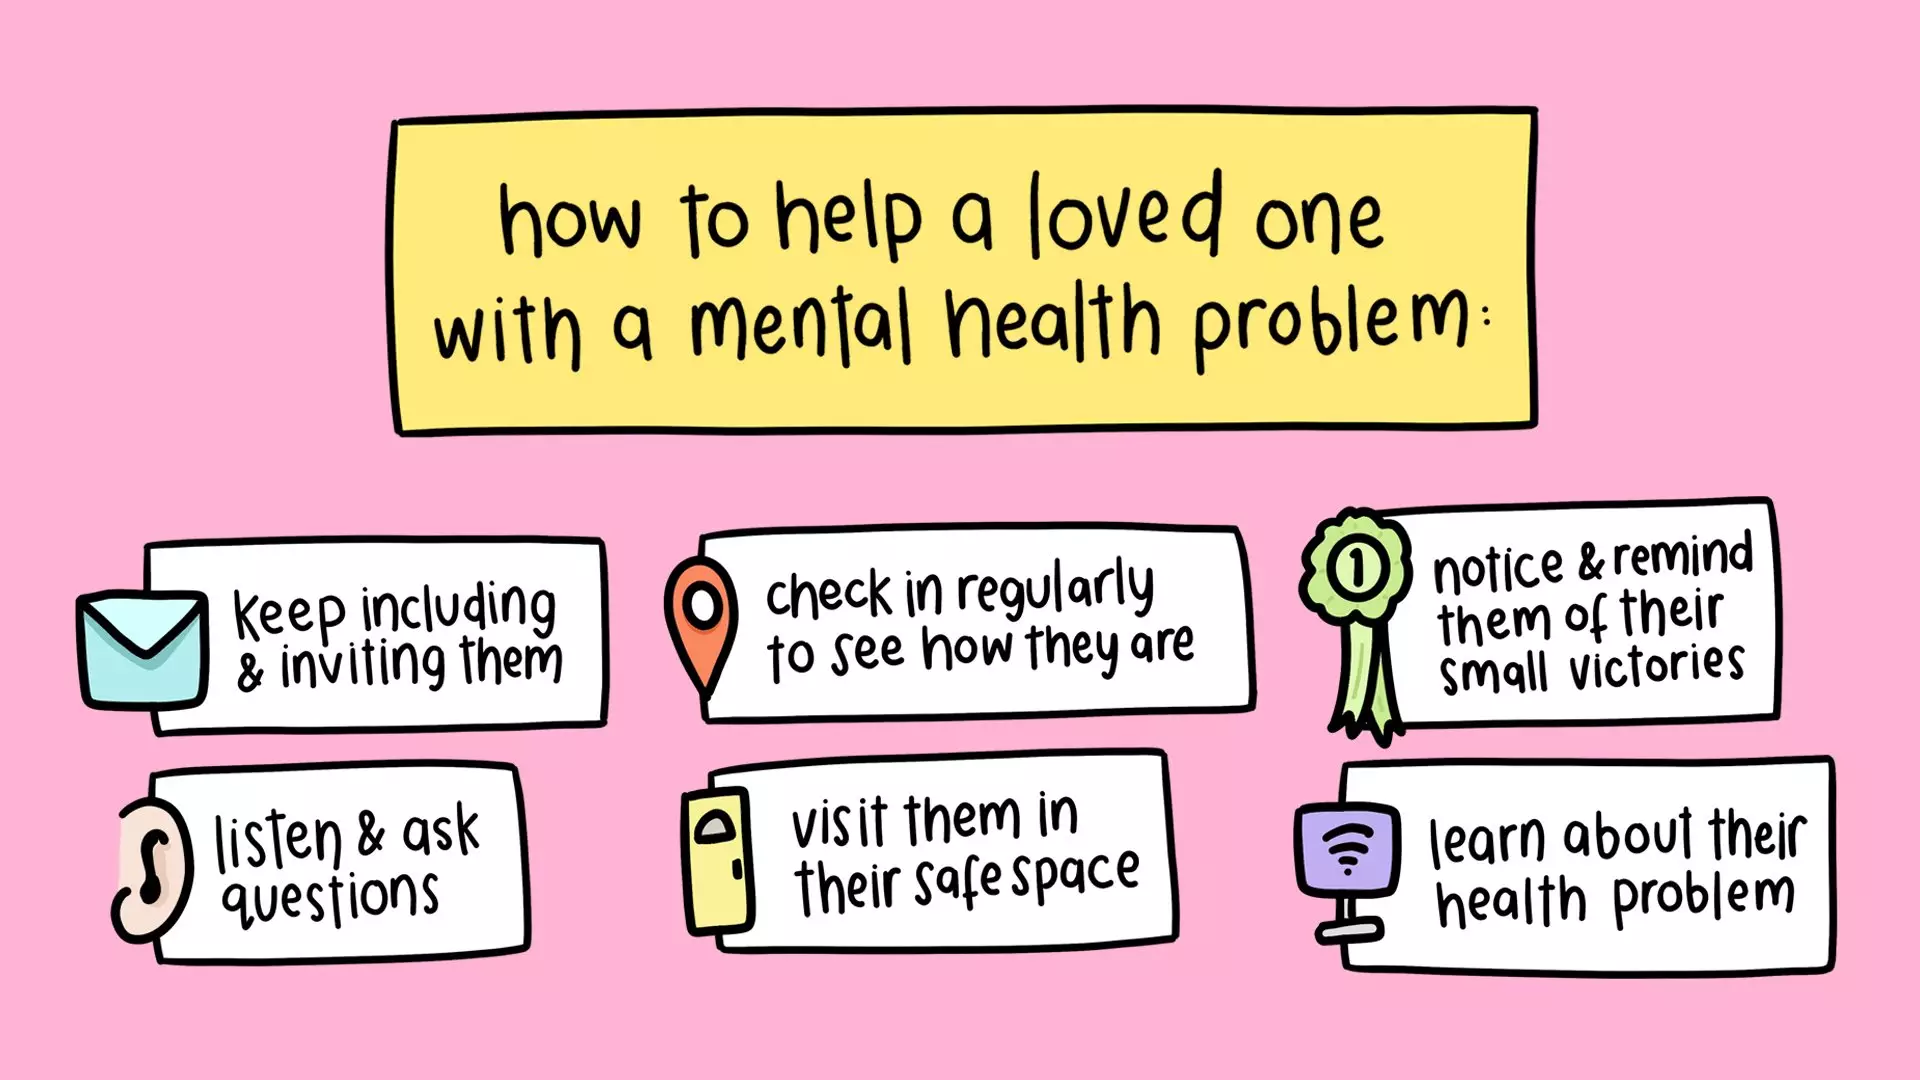 Time to Change's advice for helping a loved one with a mental health condition.